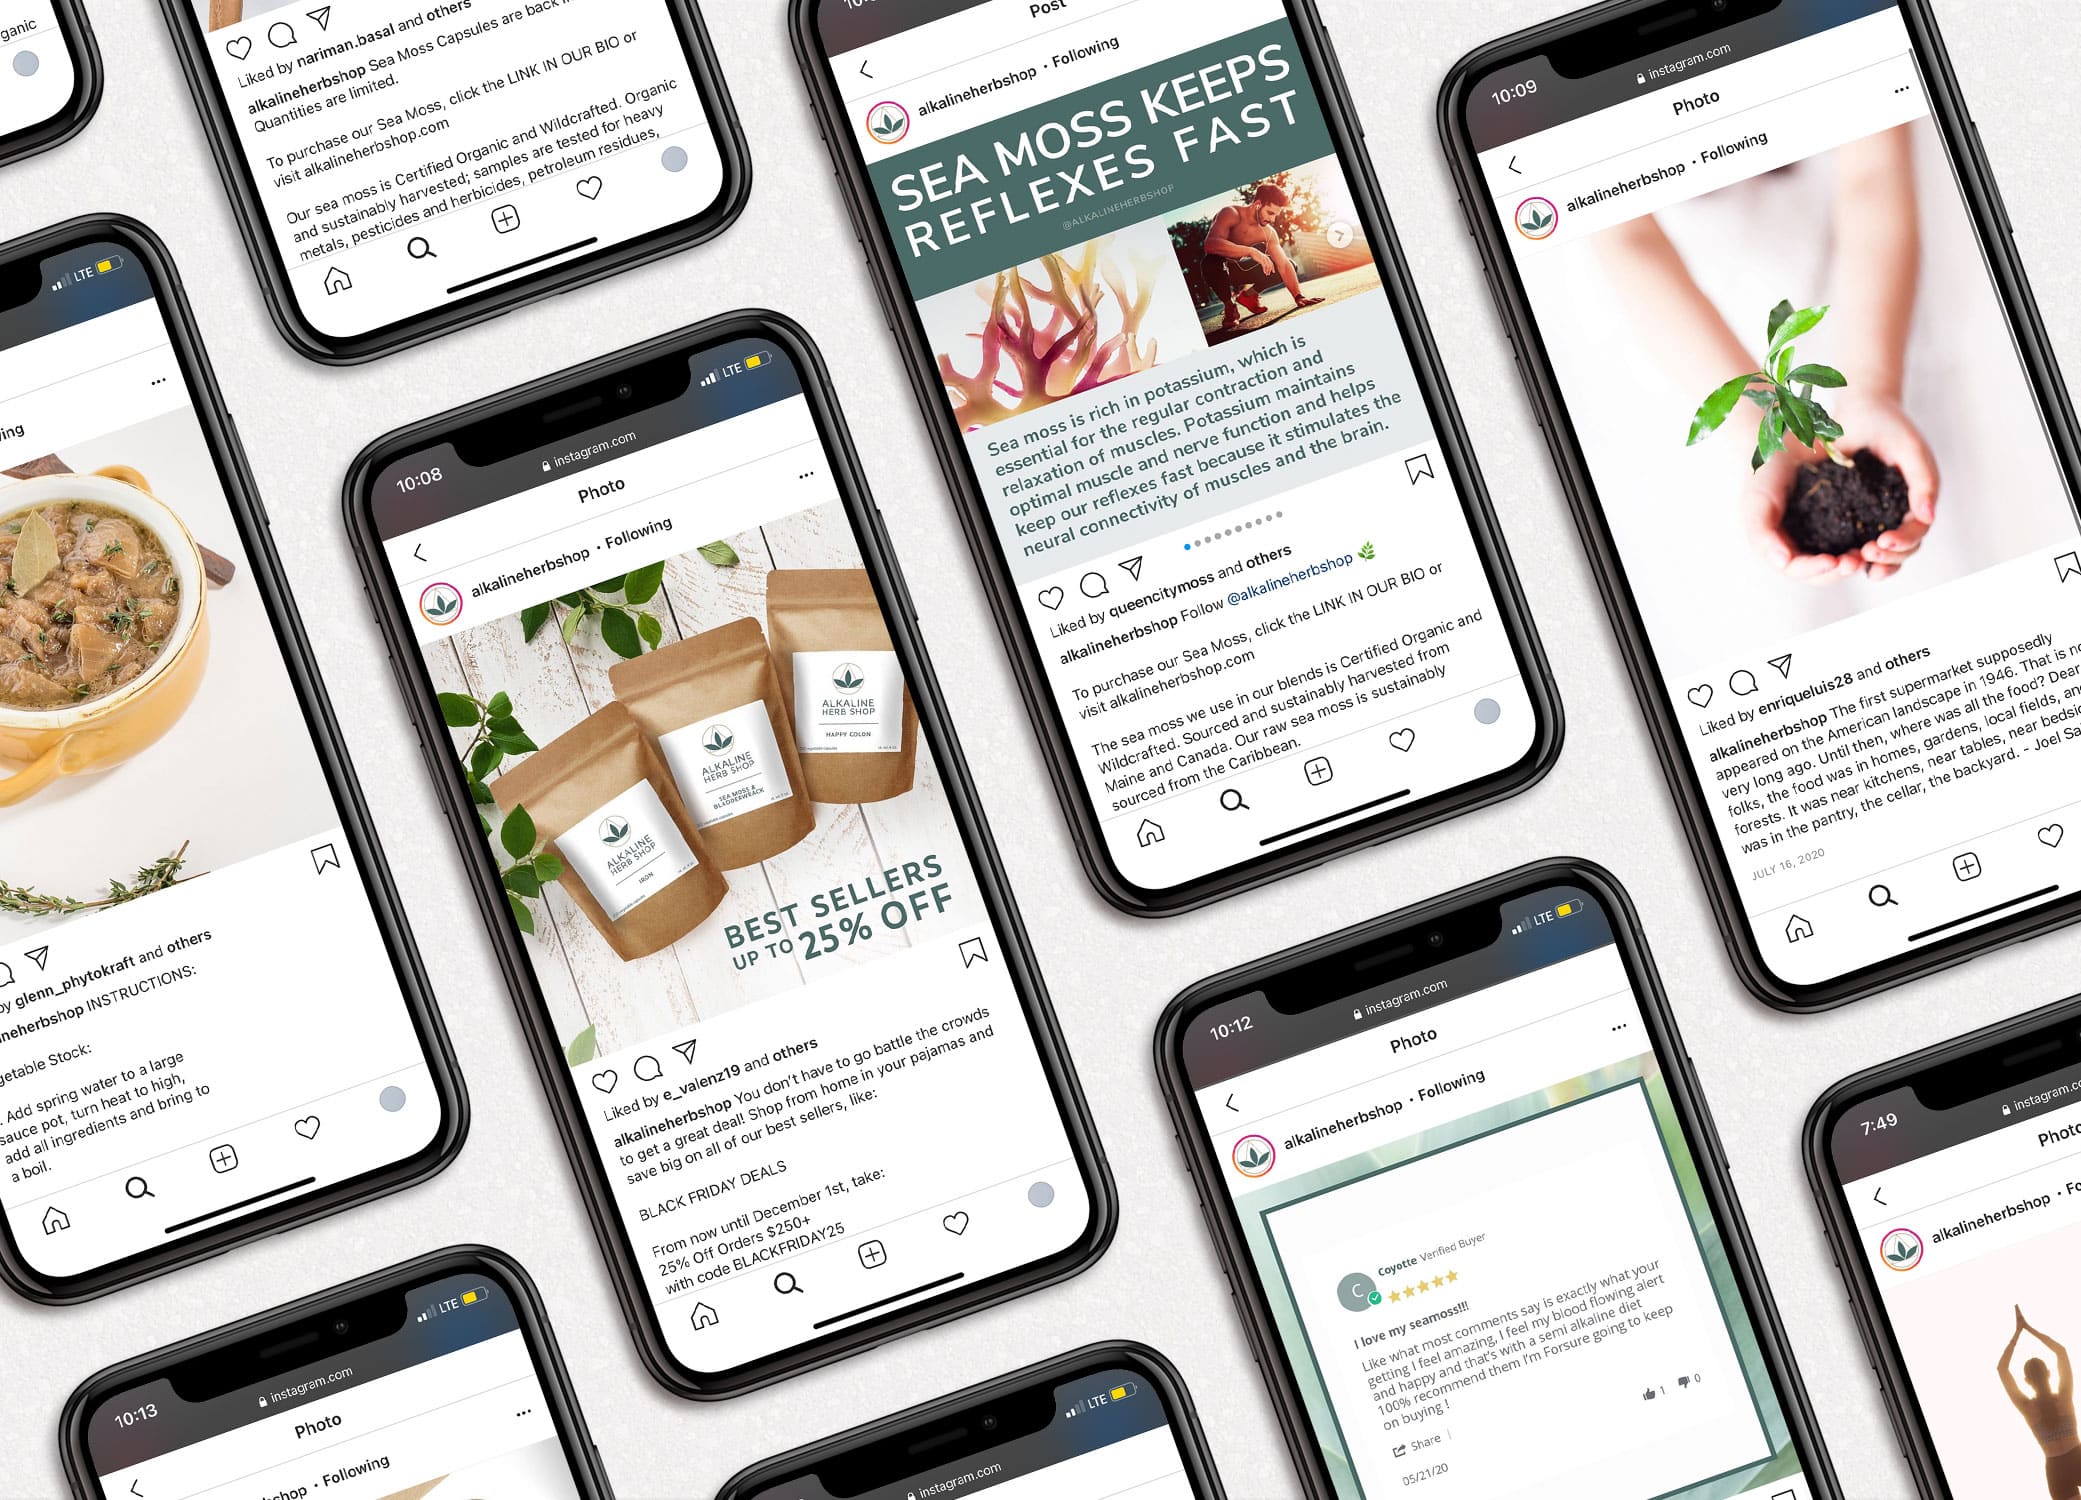 Alkaline Herb Shop supplement branding for social media with images shown on iPhones.